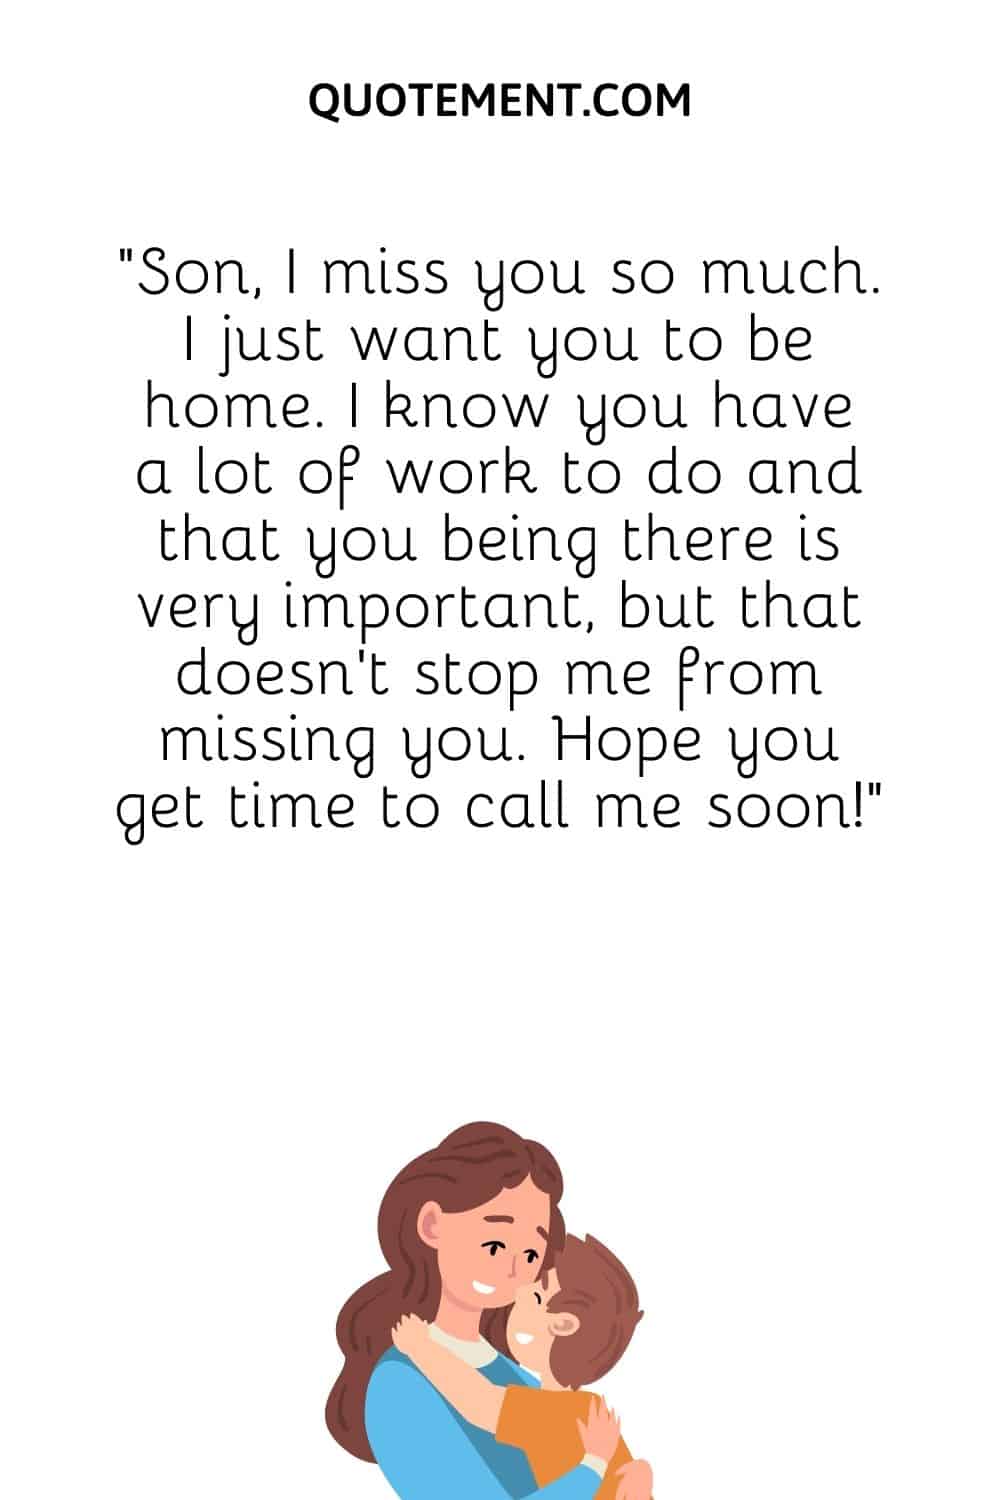 Son, I miss you so much. I just want you to be home.